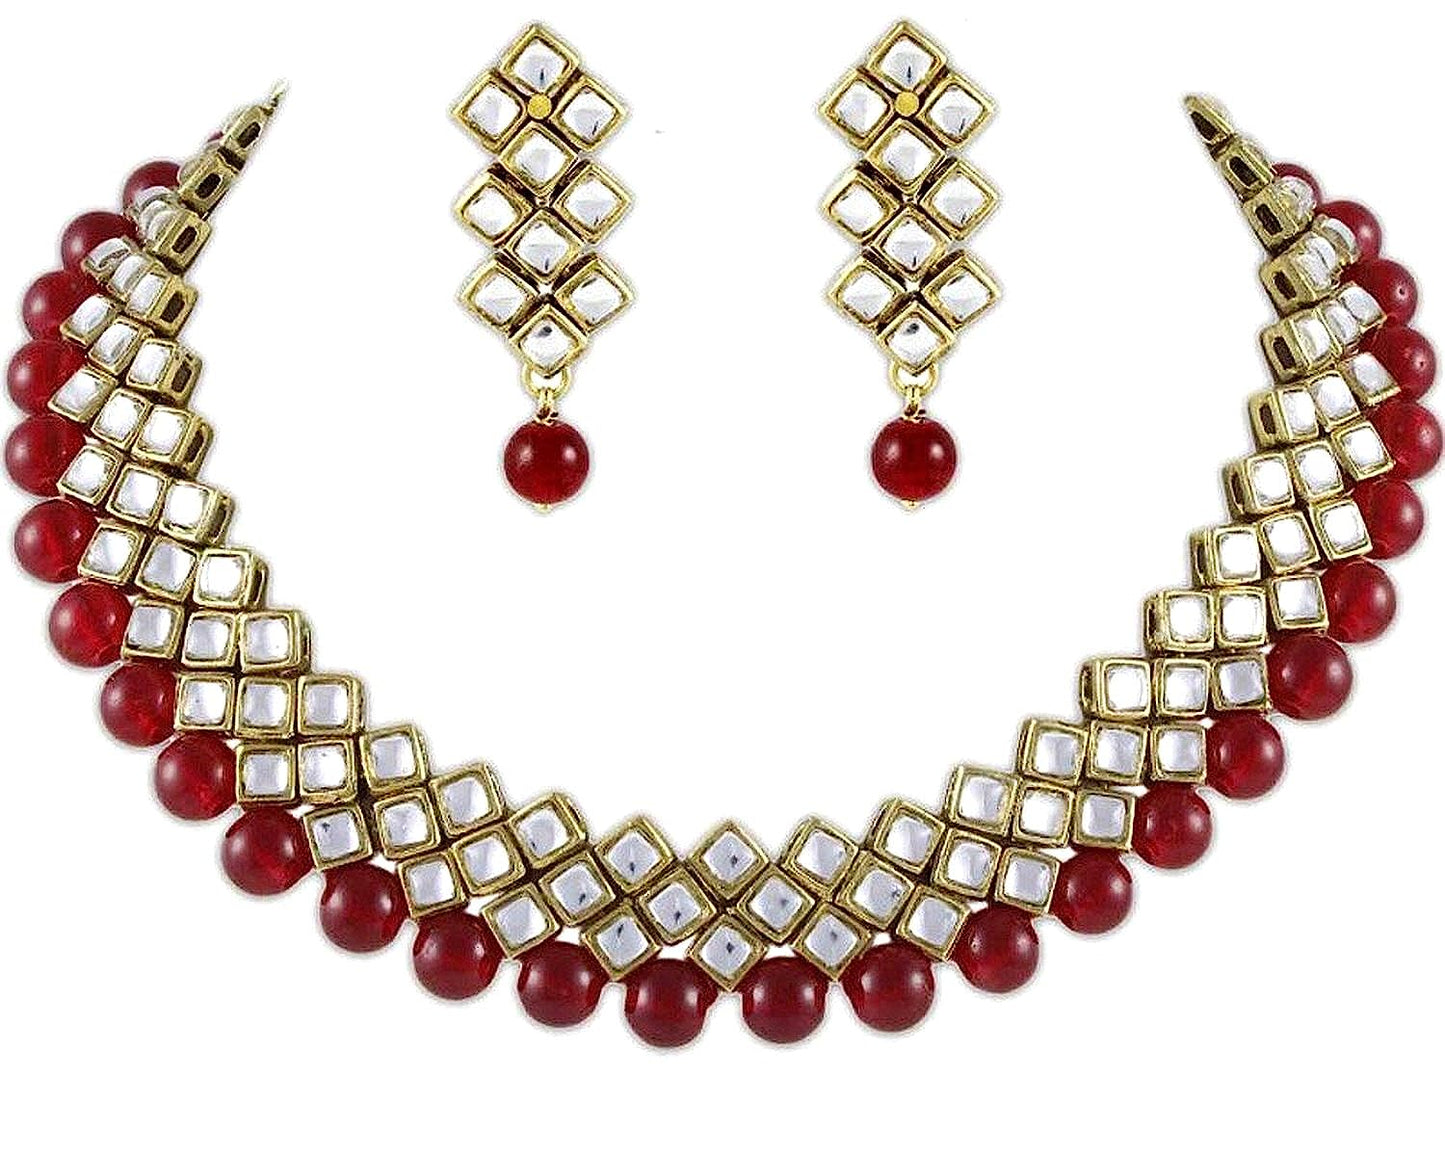 Fashion Pearl Kundan Choker Necklace Set With Earrings For Women Red